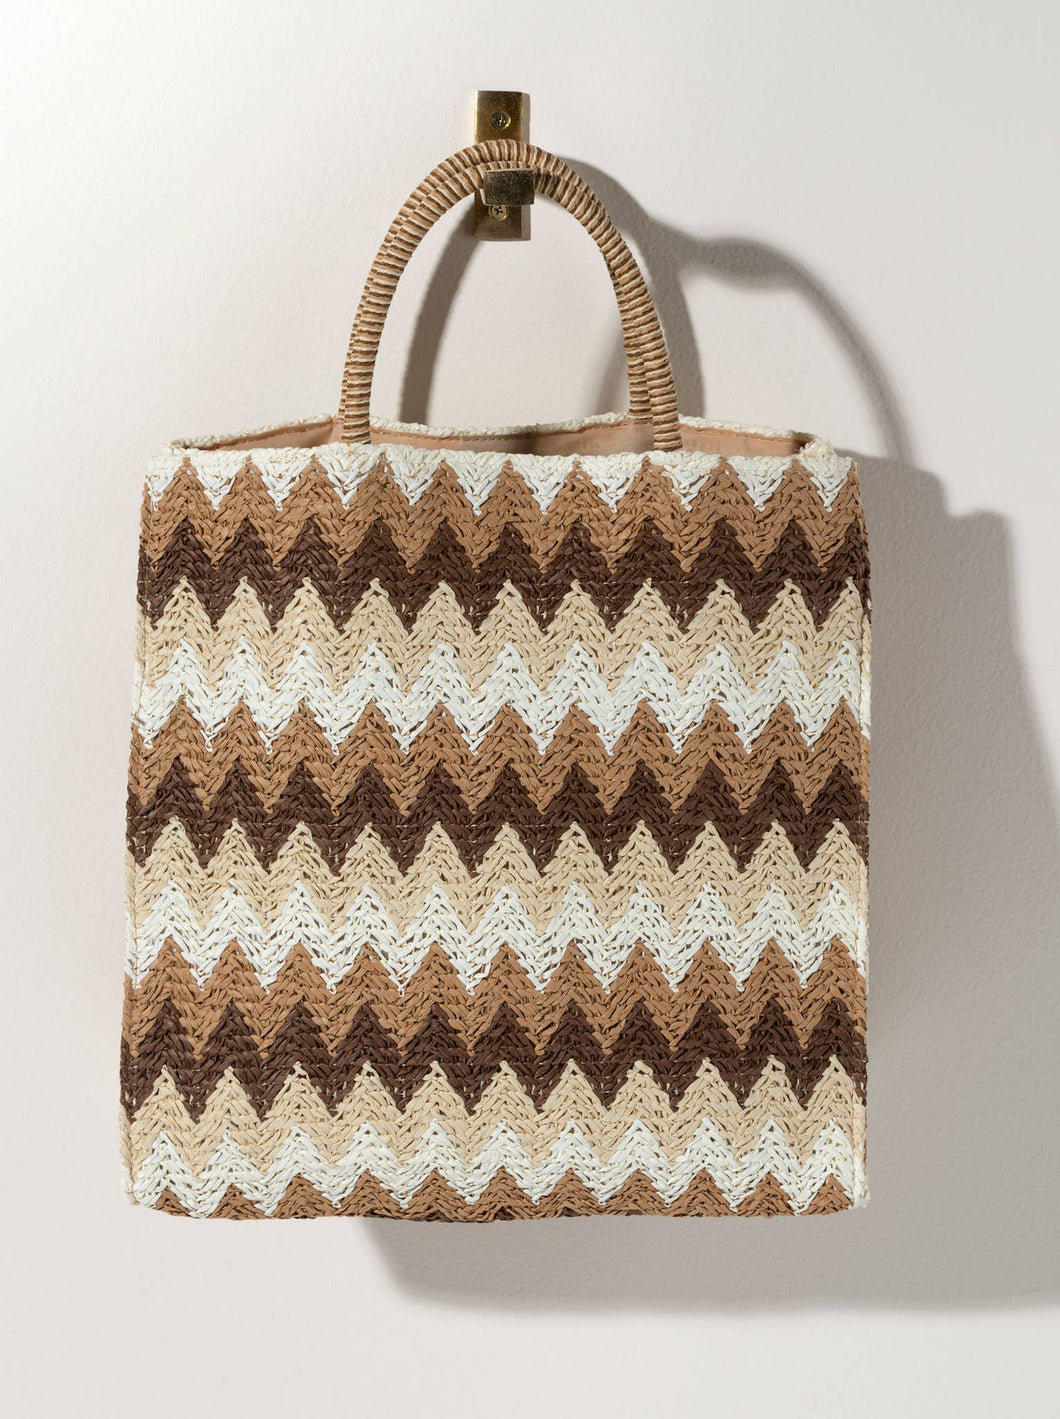 The Seychelles Tote